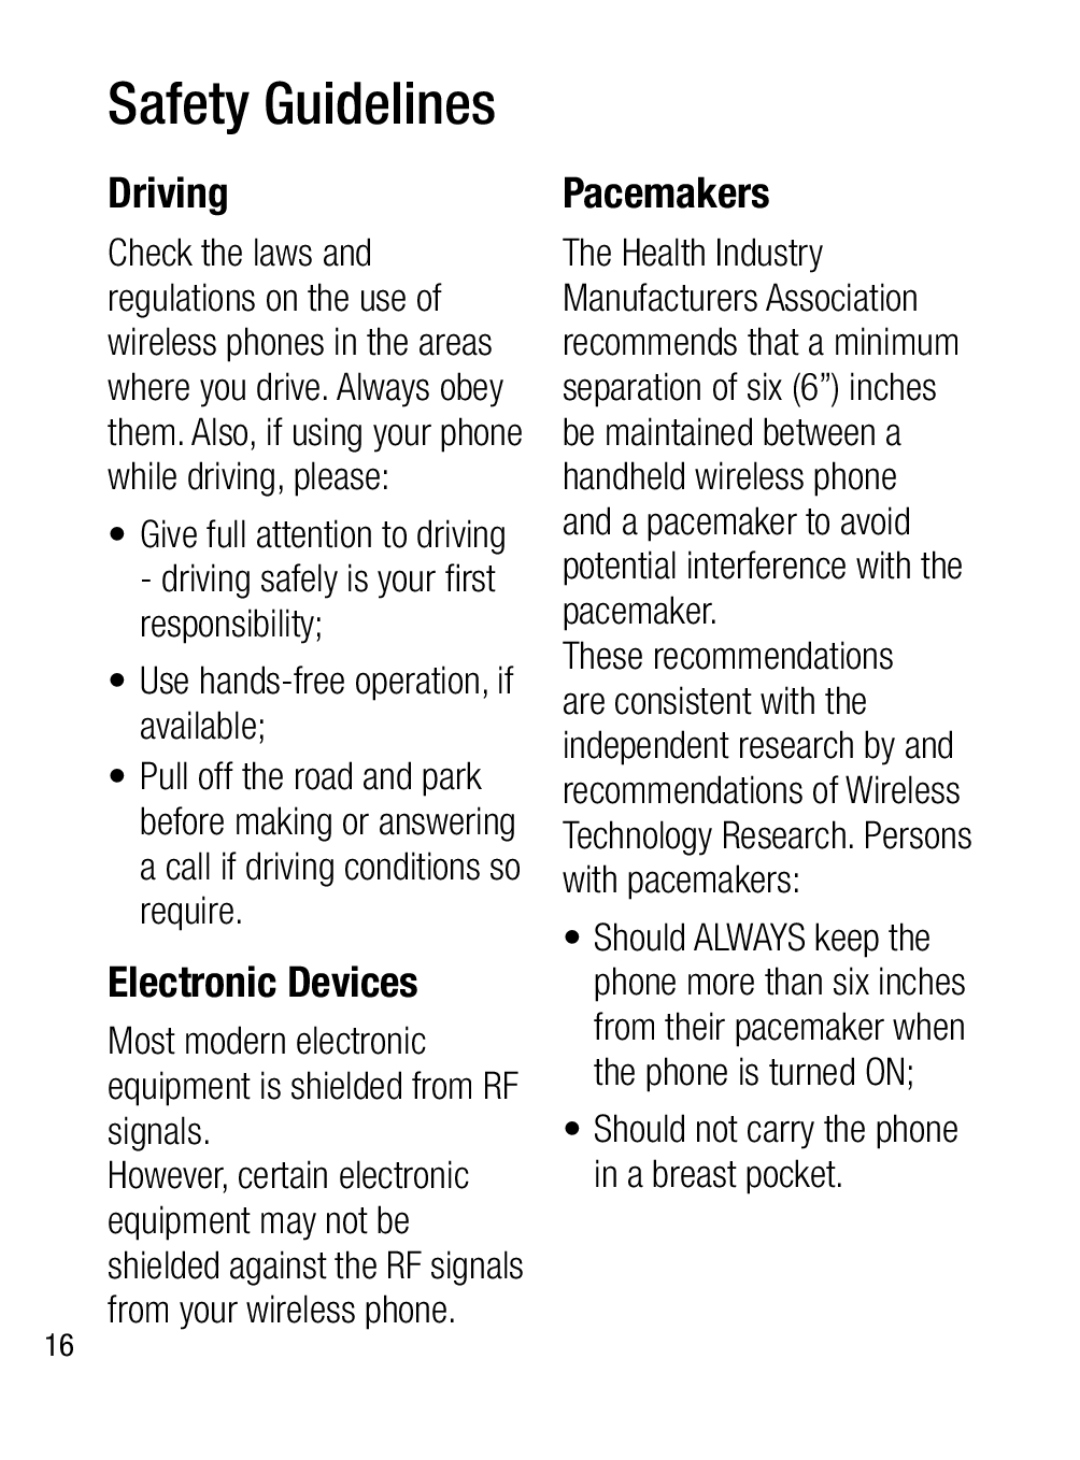 LG Electronics A133CH Driving, Electronic Devices, Pacemakers, Use hands-free operation, if available, Safety Guidelines 